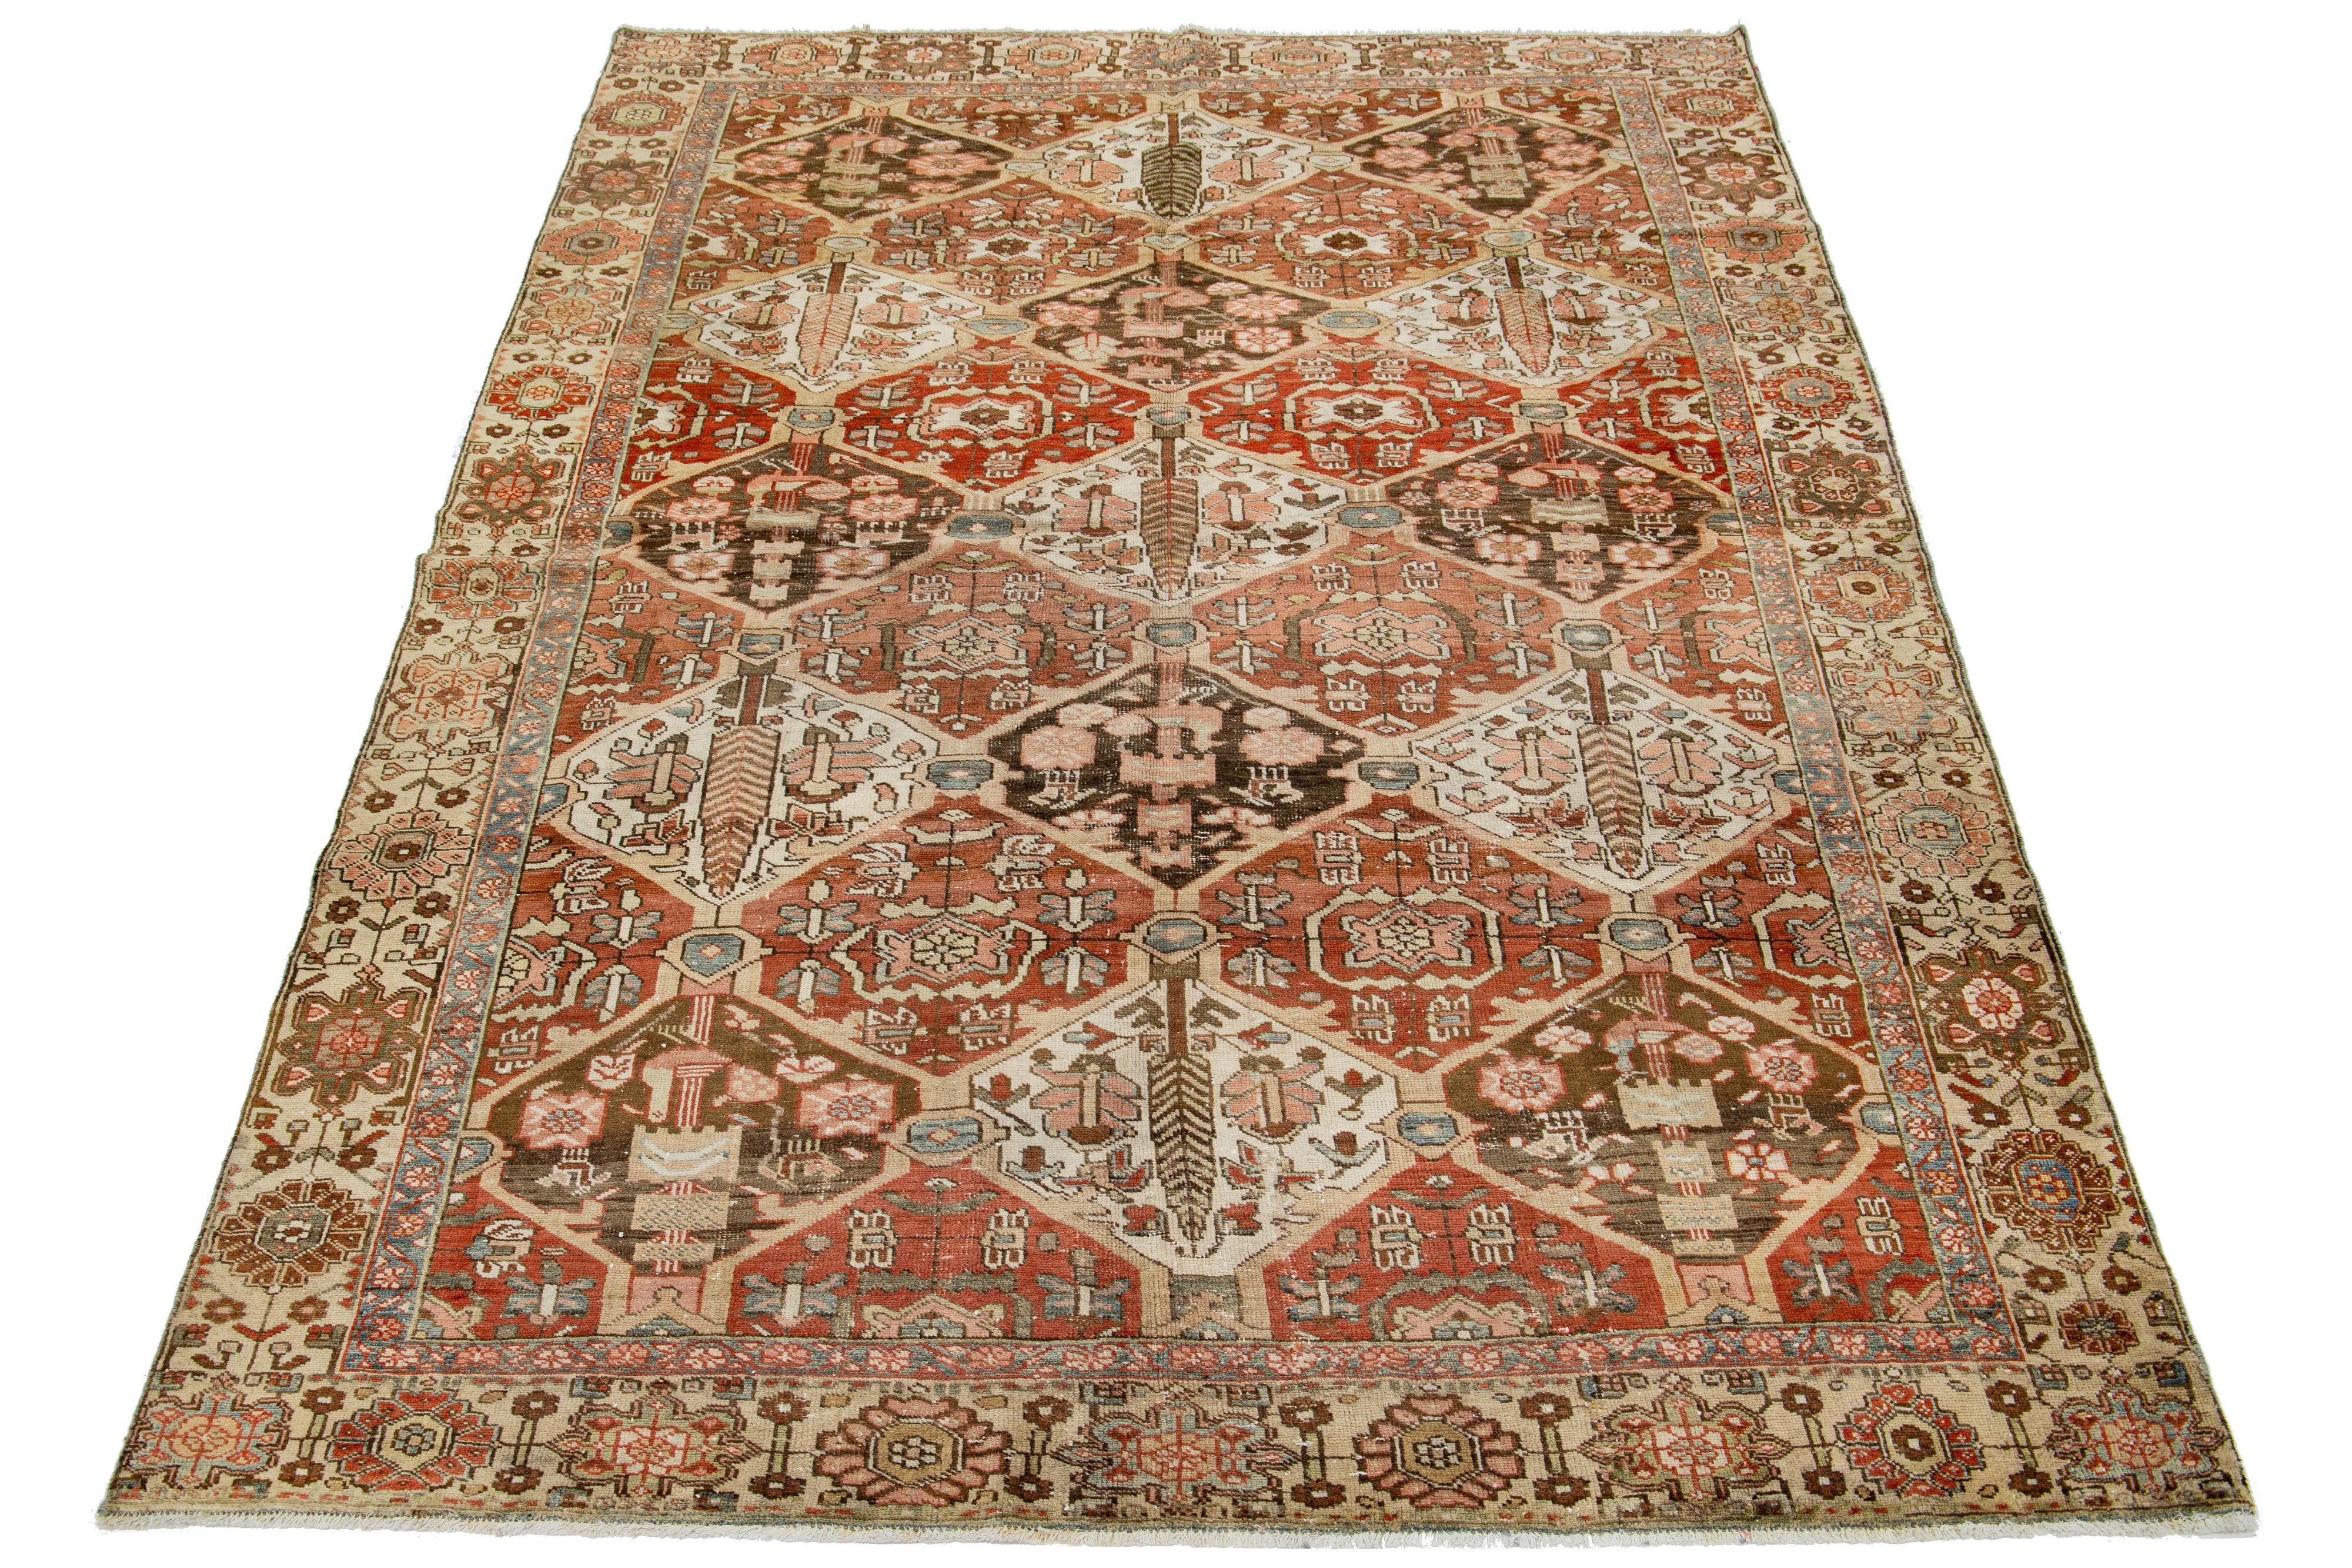 This beautiful antique Bakhtiari hand-knotted wool rug features a field of red-rust color. It showcases a classic Persian design with blue, beige, and peach floral colors.

This rug measures 6'5